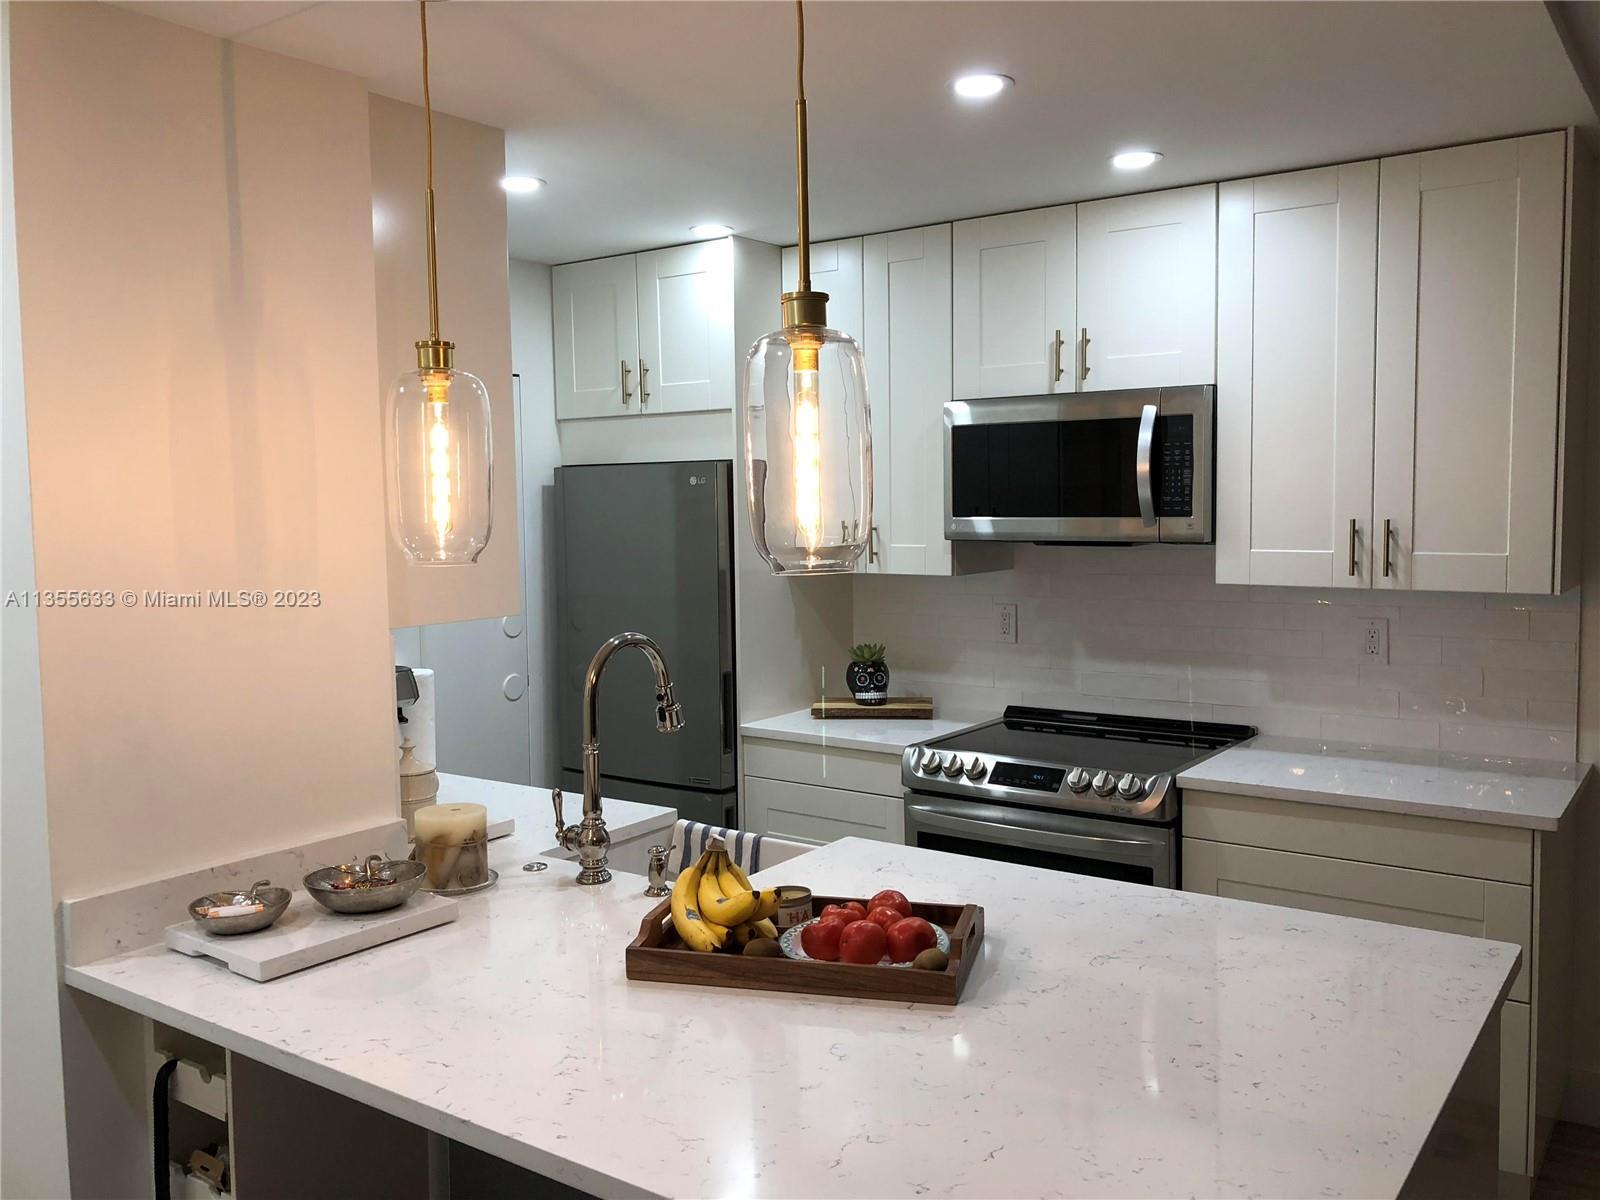 Beautifully remodeled 2-bedroom 1 bathroom unit in a famous Victoria Park area. Walking distance to 